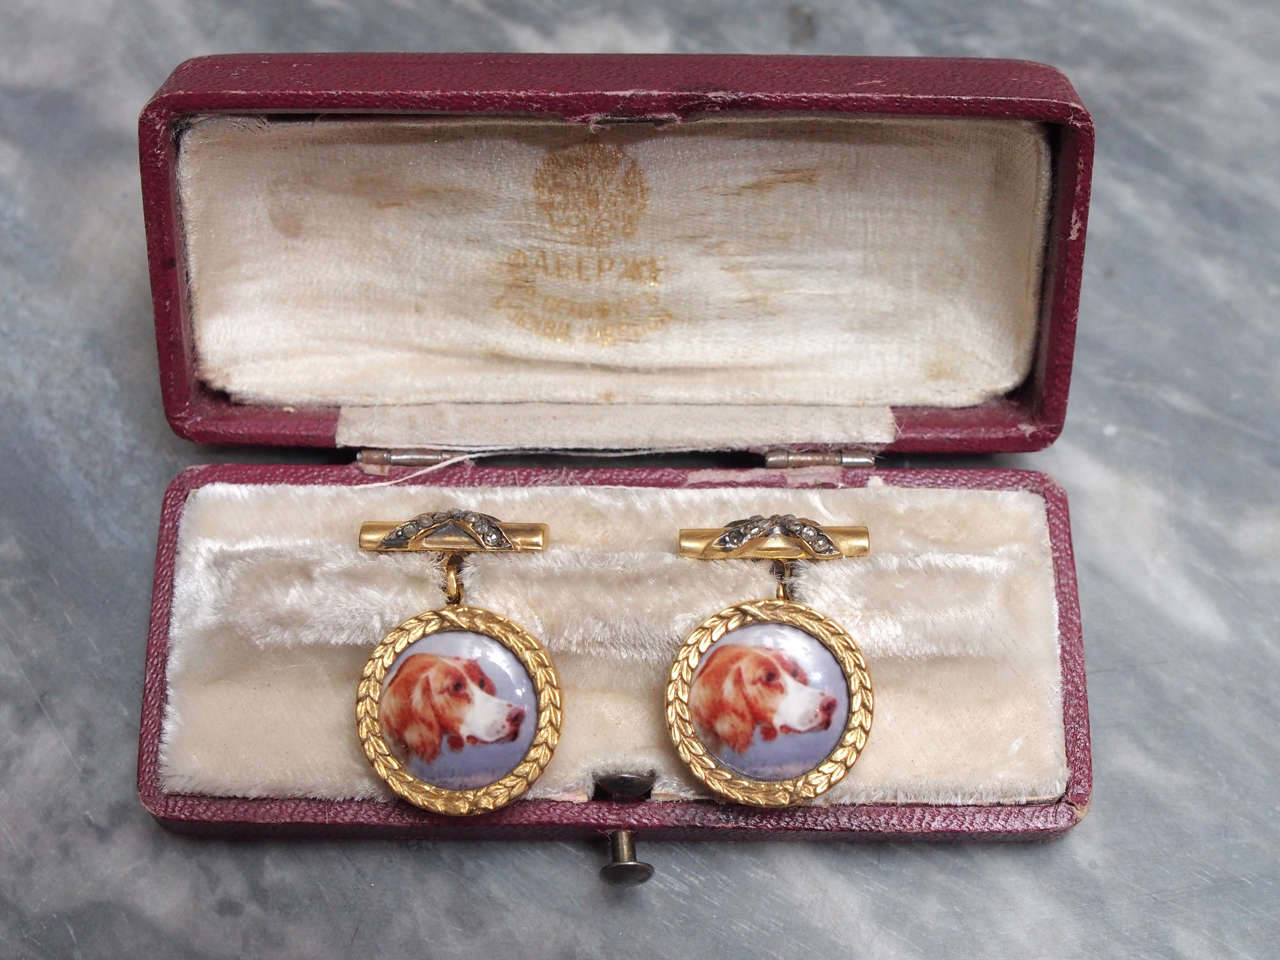 Pair of antique Russian cufflinks with miniature portraits of hounds framed by laurel wreaths and X ribbons of diamonds on the rear. In original case.